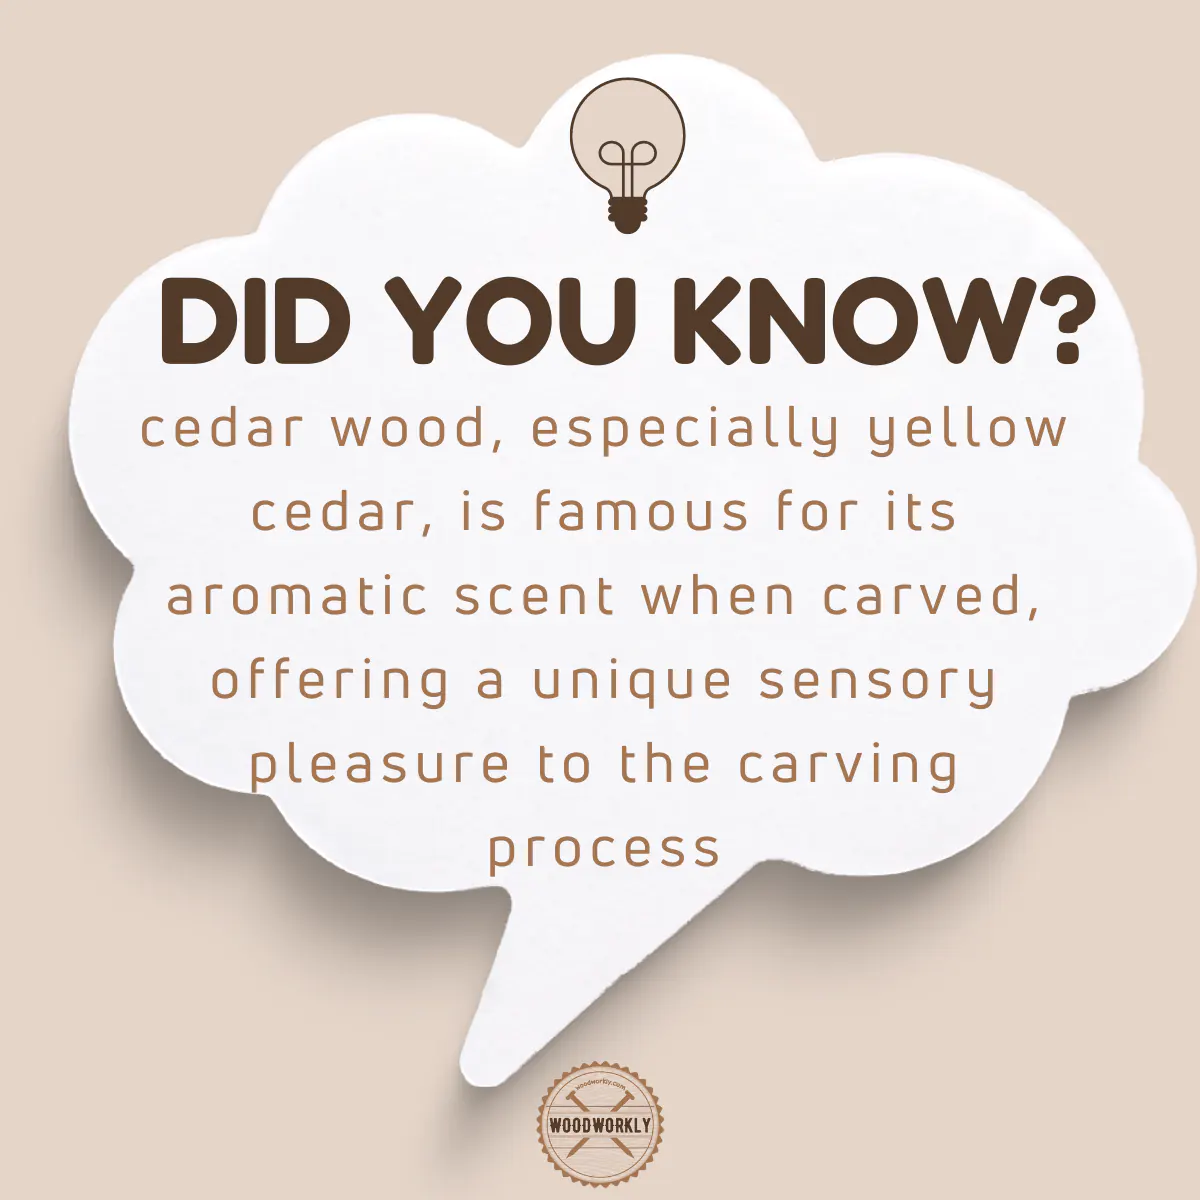 Did you know fact about Cedar wood For Carving